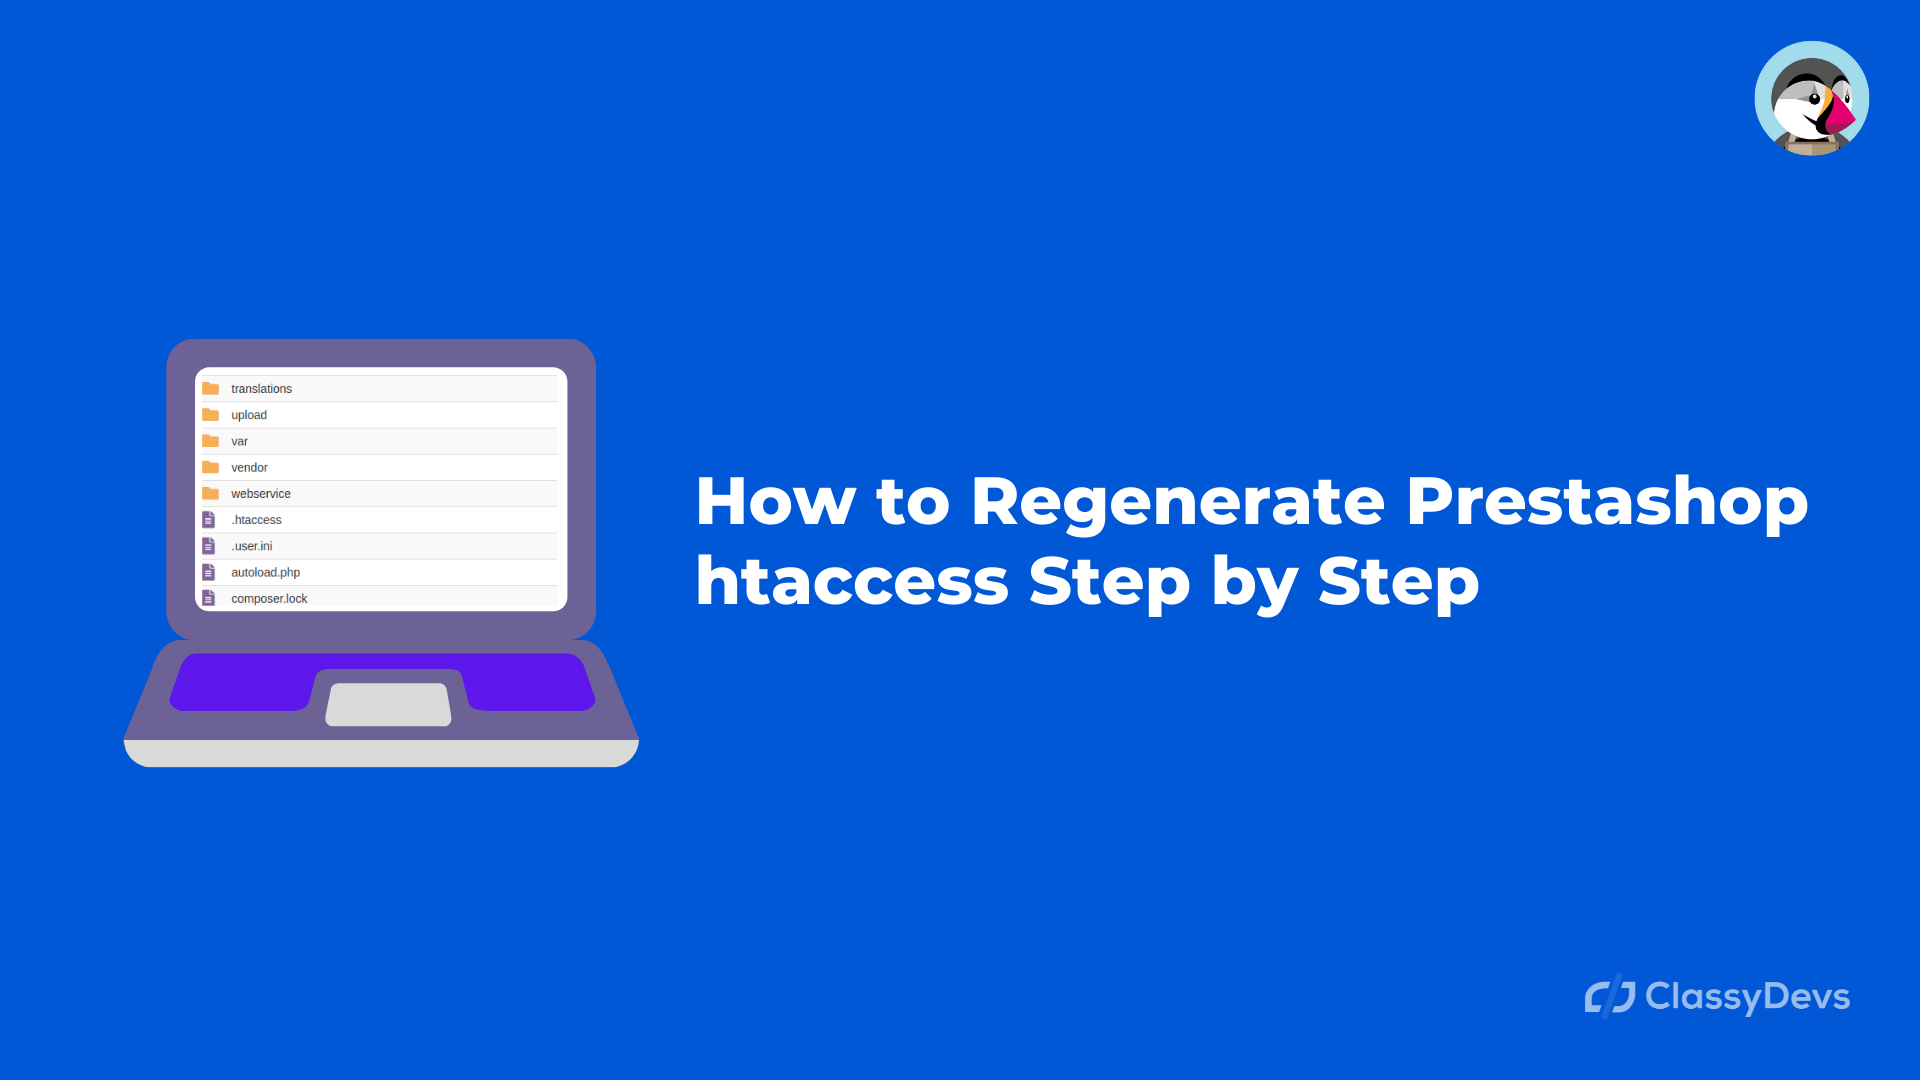 How to Regenerate Prestashop htaccess Step by Step